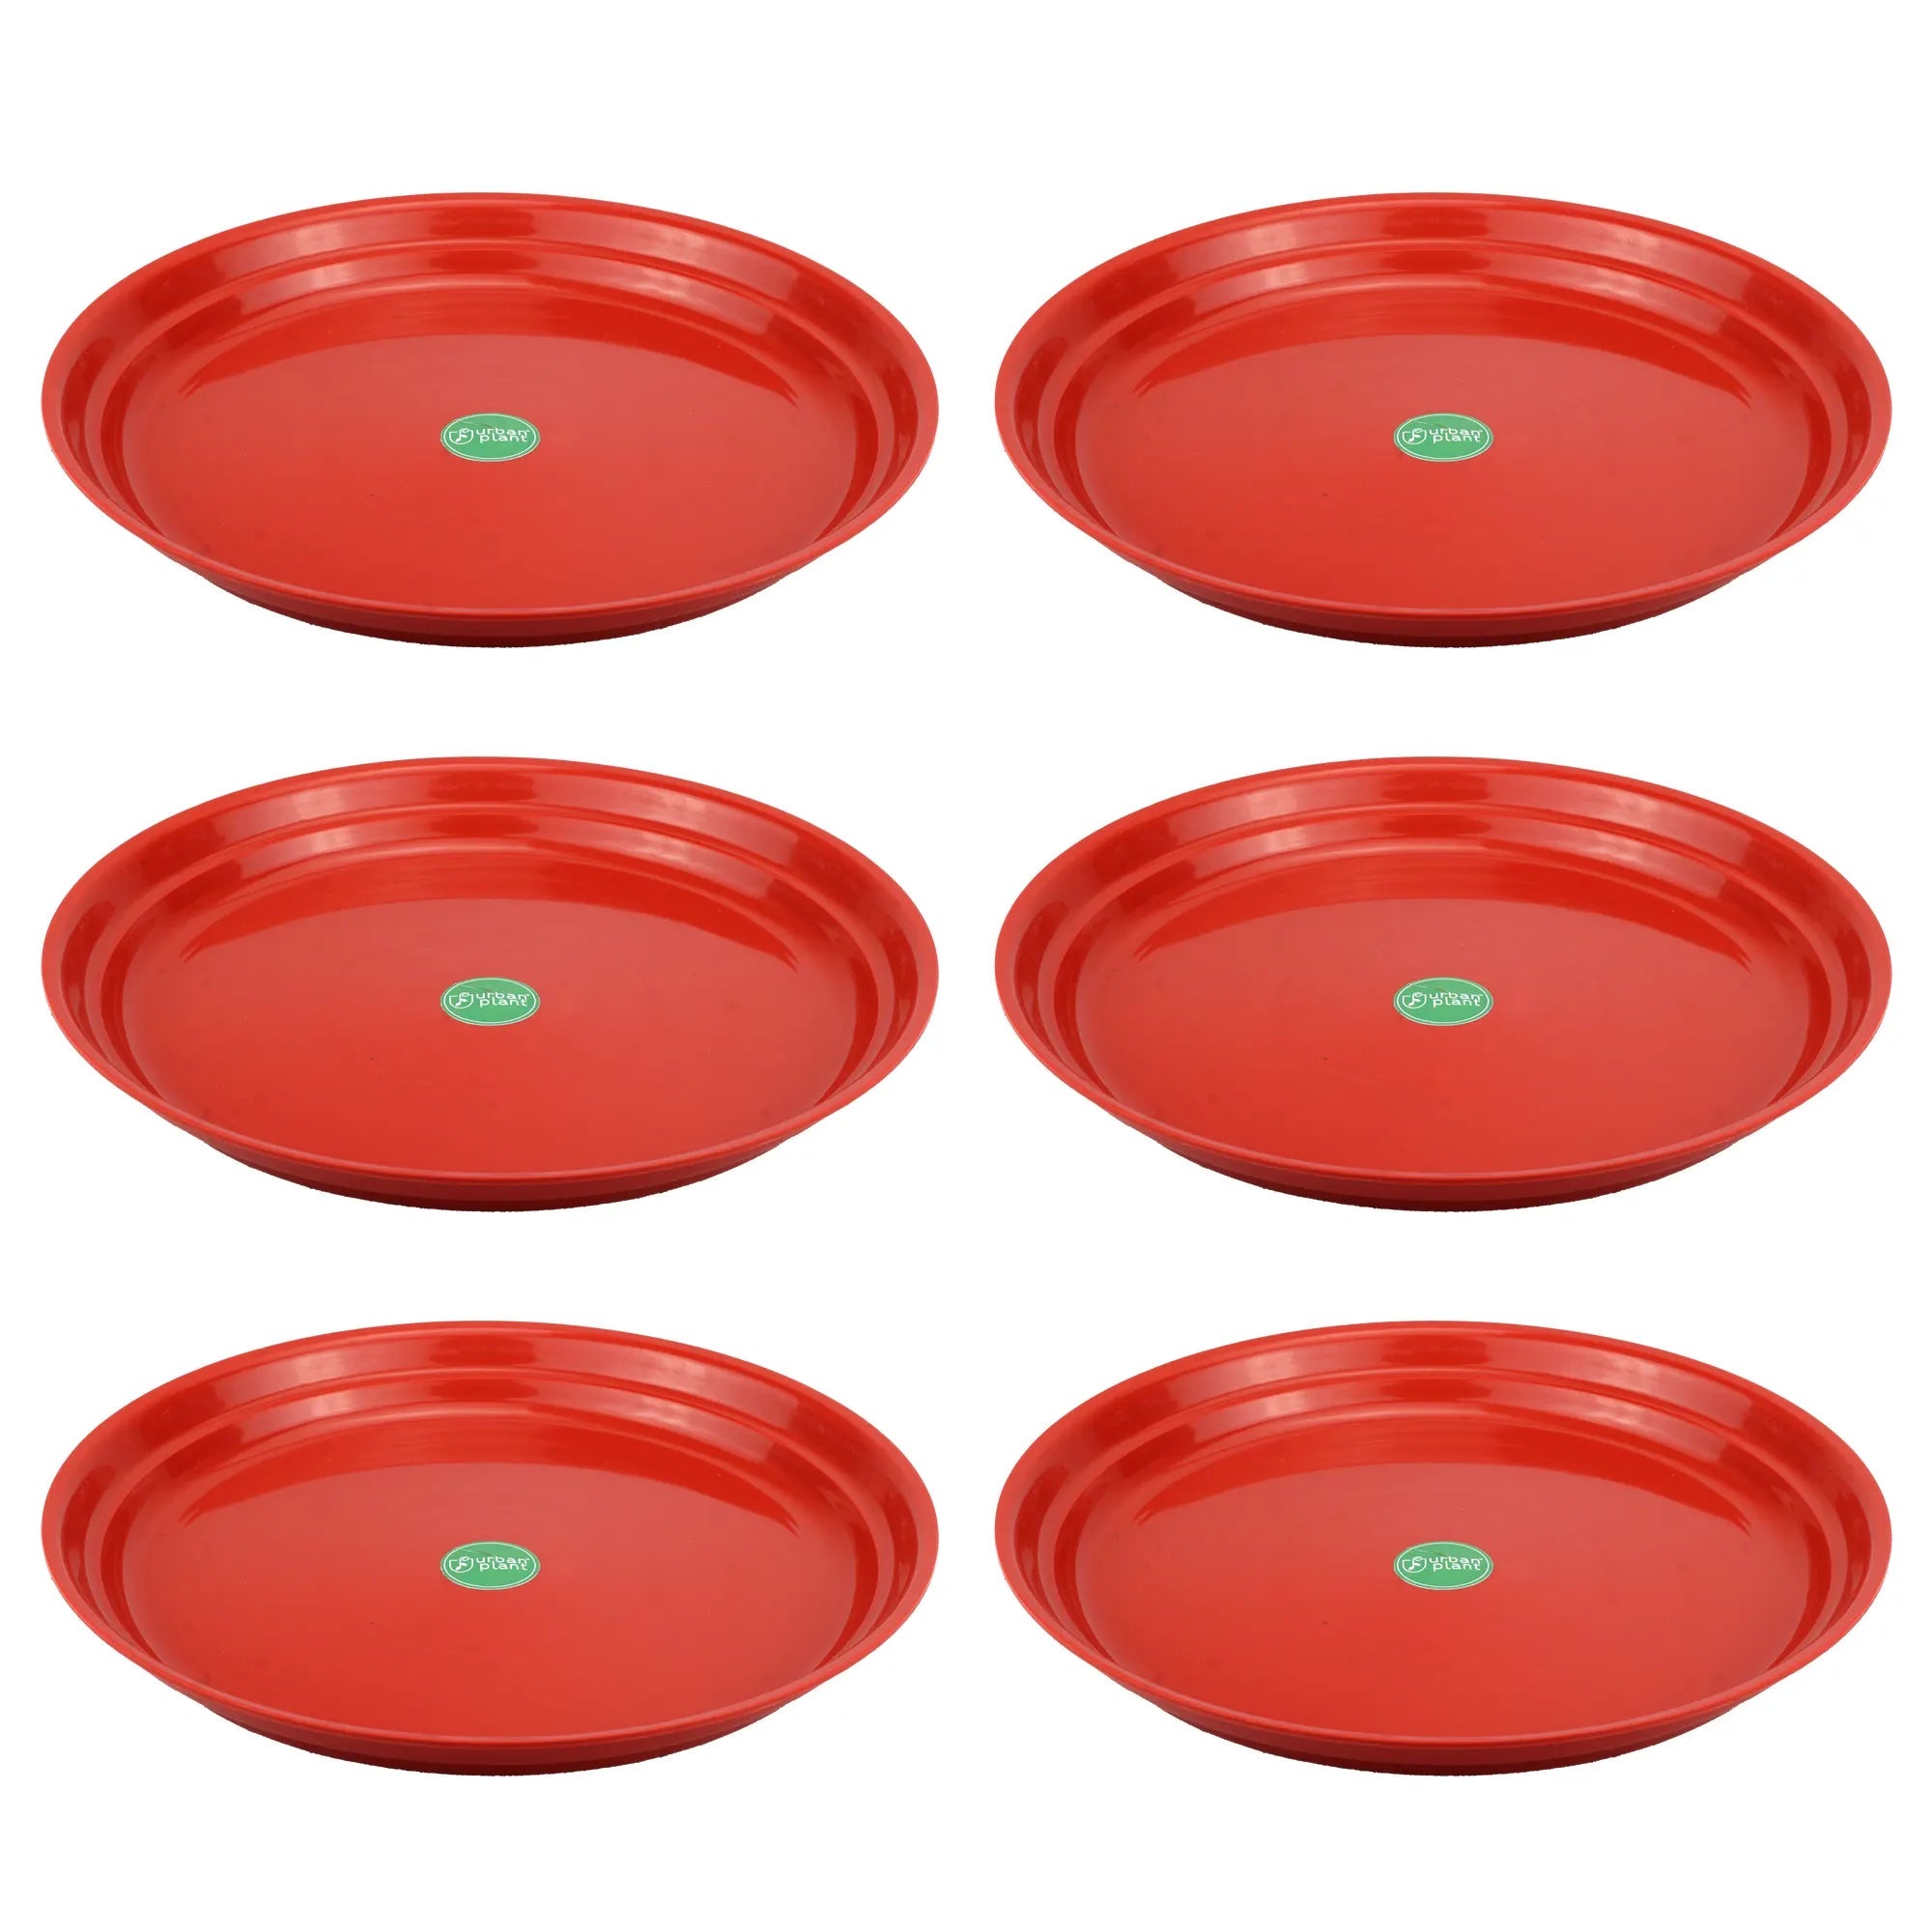 Urban Plant Round Bottom Tray (Plate/Saucer) for All Type of Pots Urban Plant 12 Inch Set of 6 